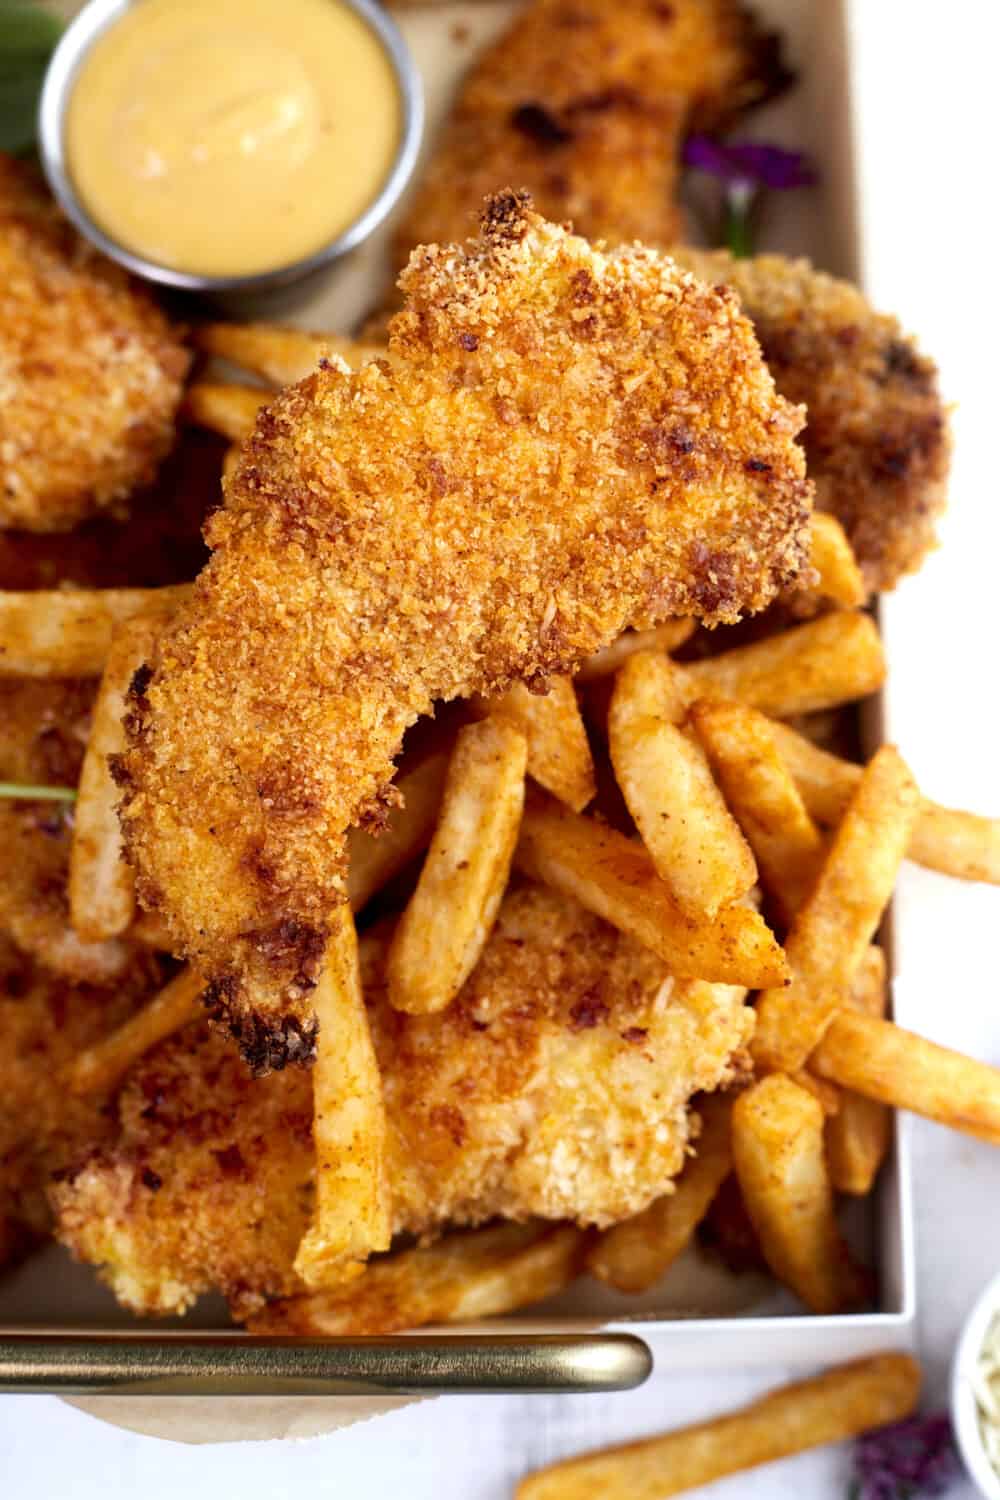 oven-baked parmesan chicken tenders with fries